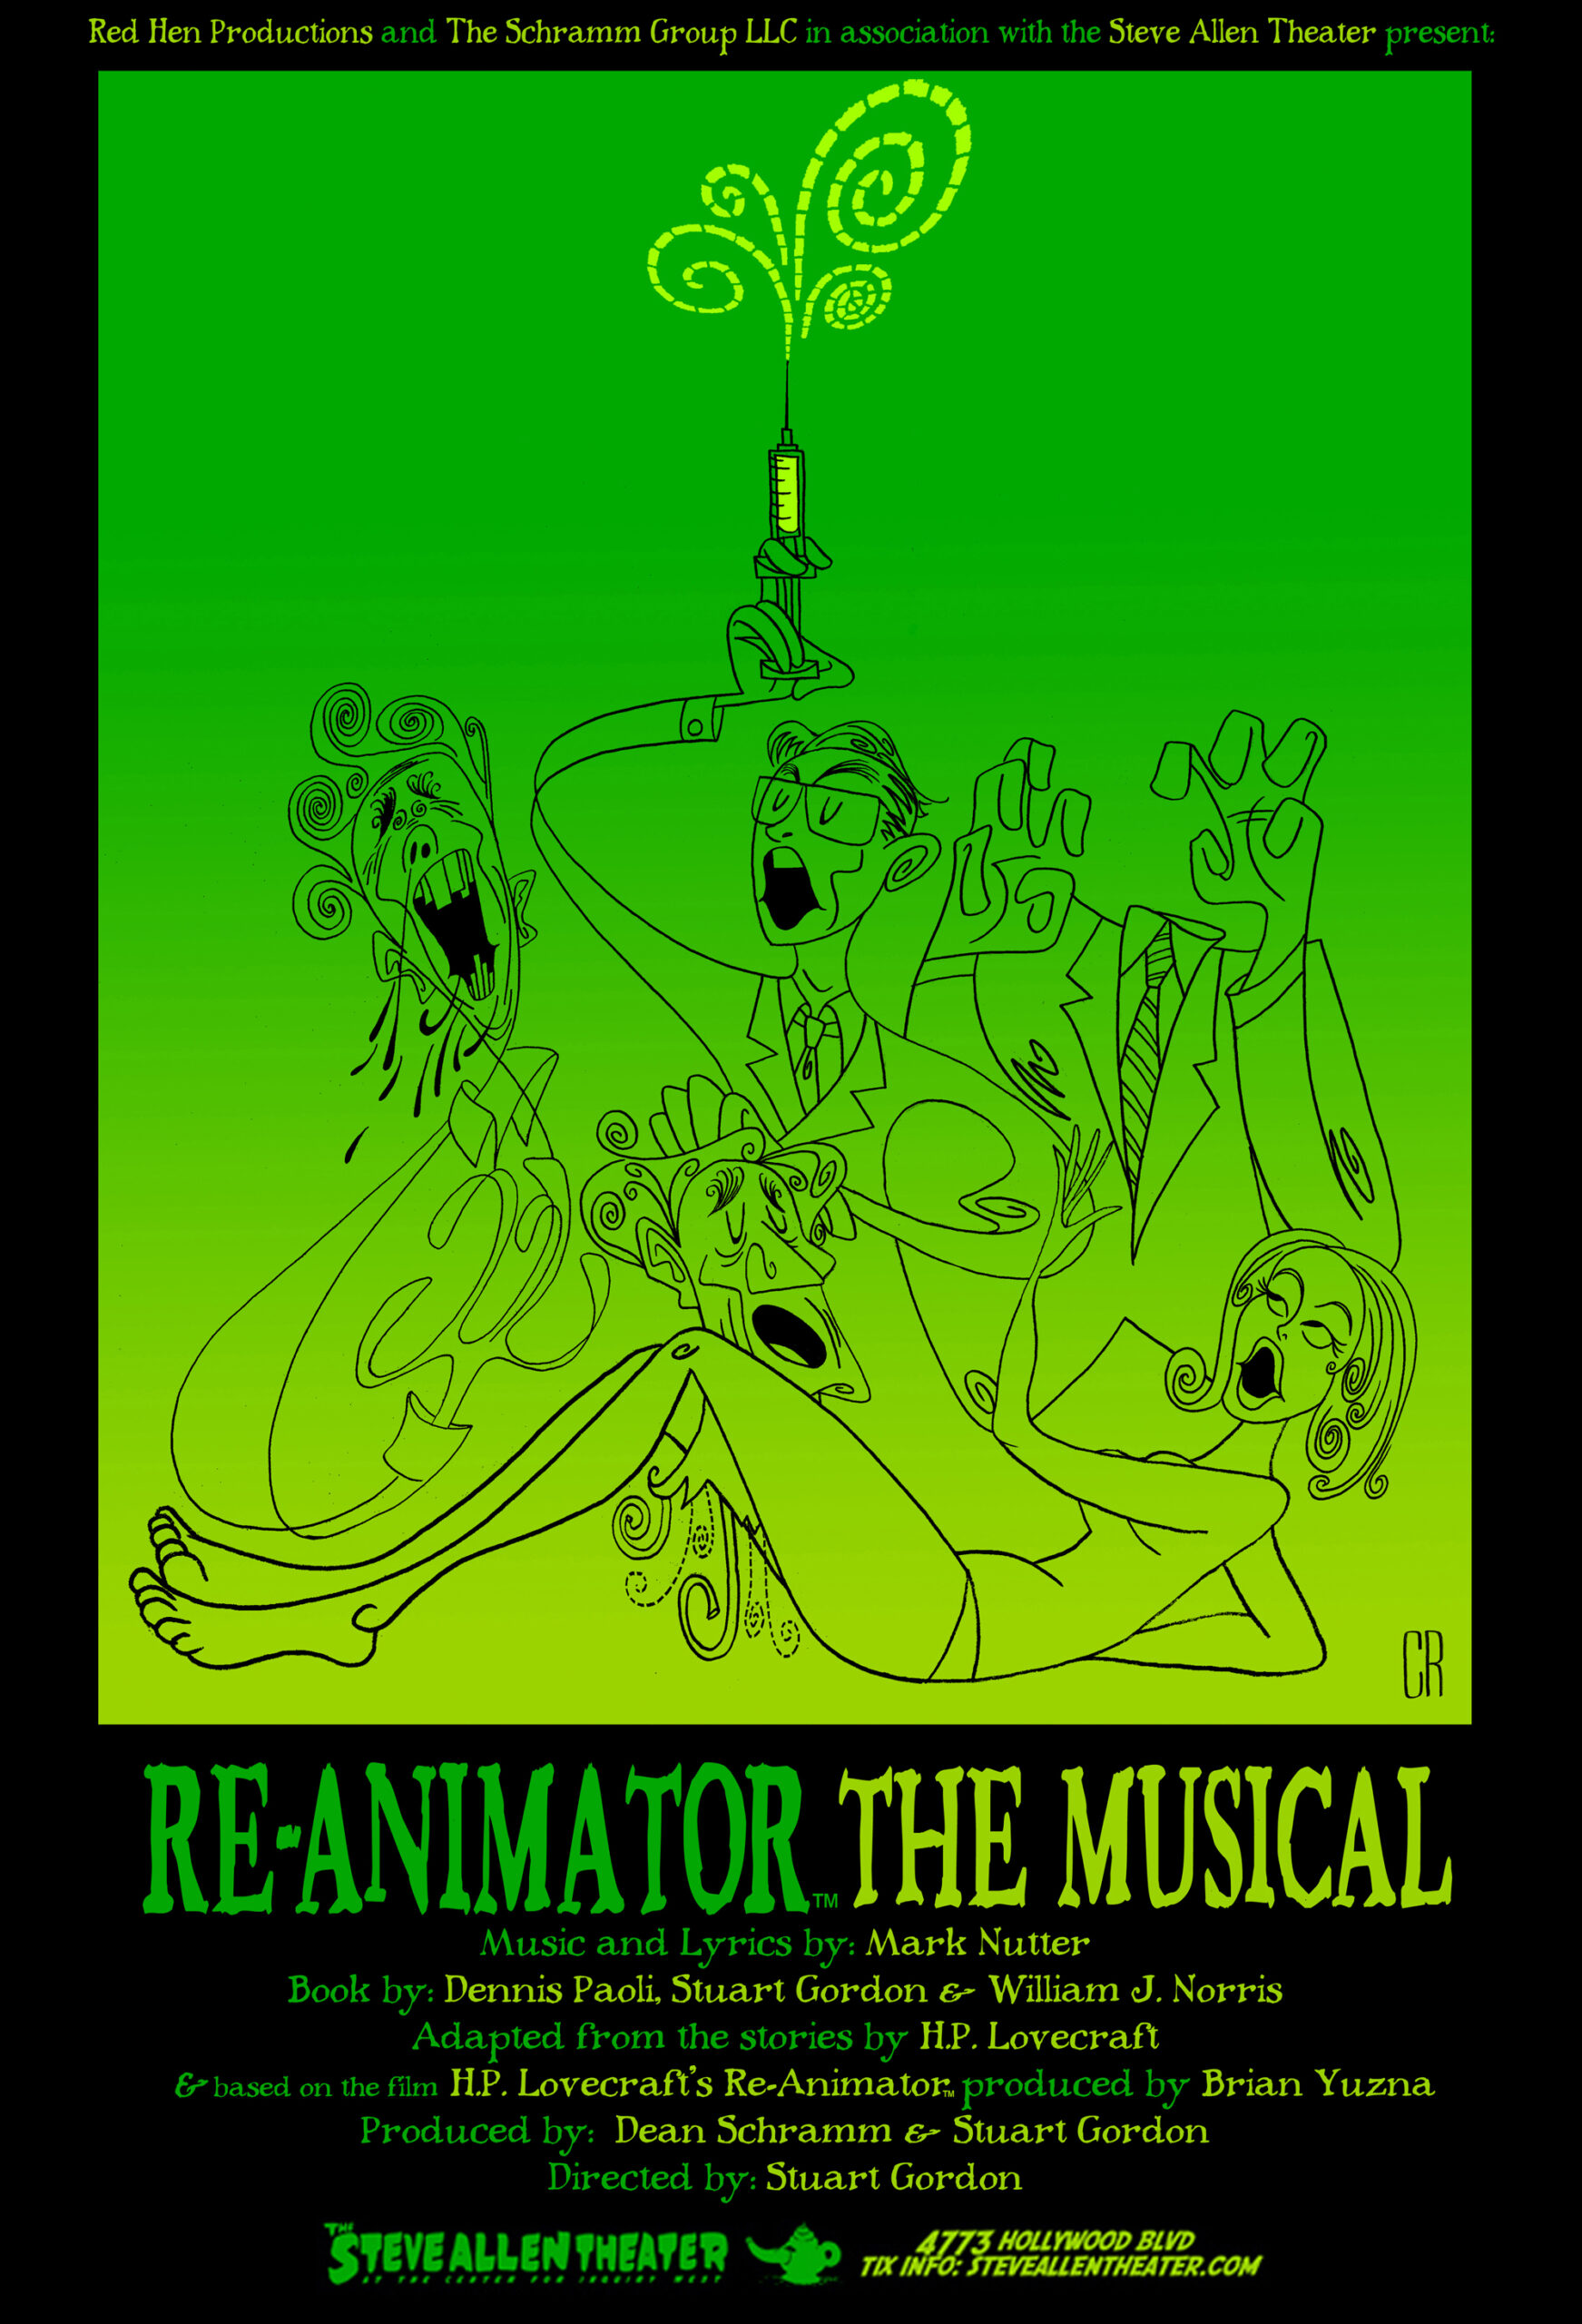 Re-Animator: The Musical Poster